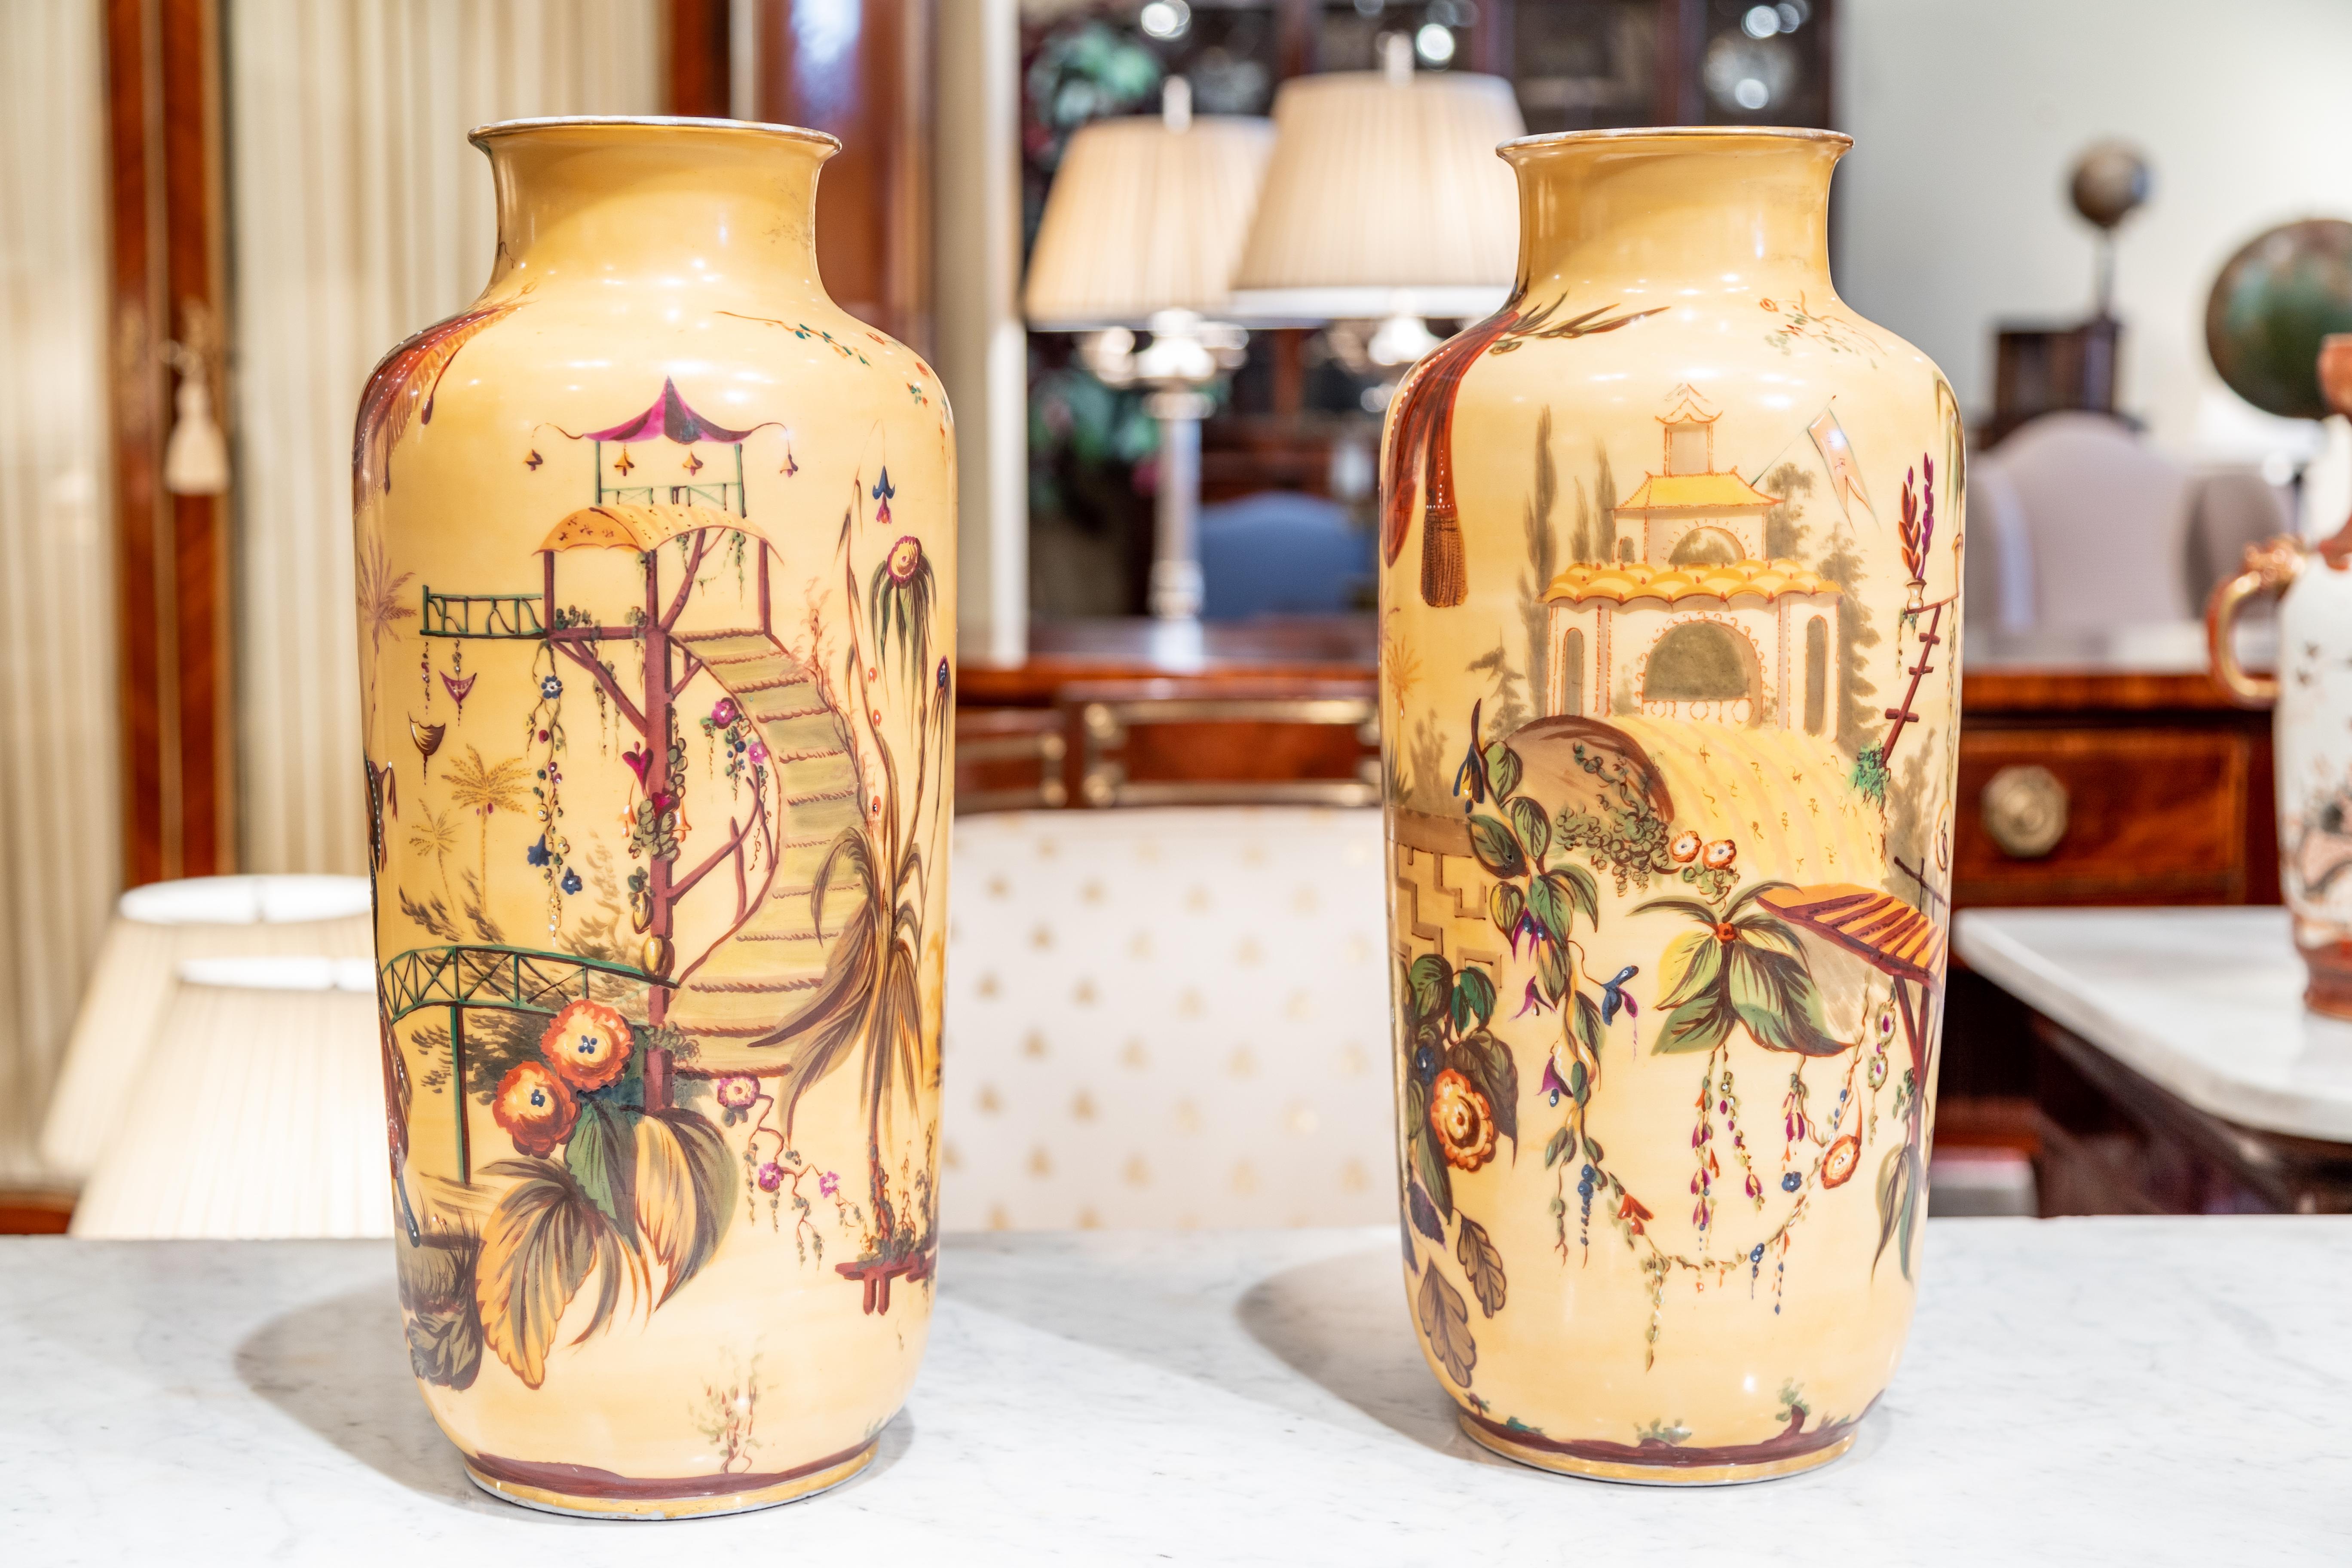 A very fine pair of French Jacob Petit style porcelain 19th century vases with elaborate hand painted scenes of Chinese figures.